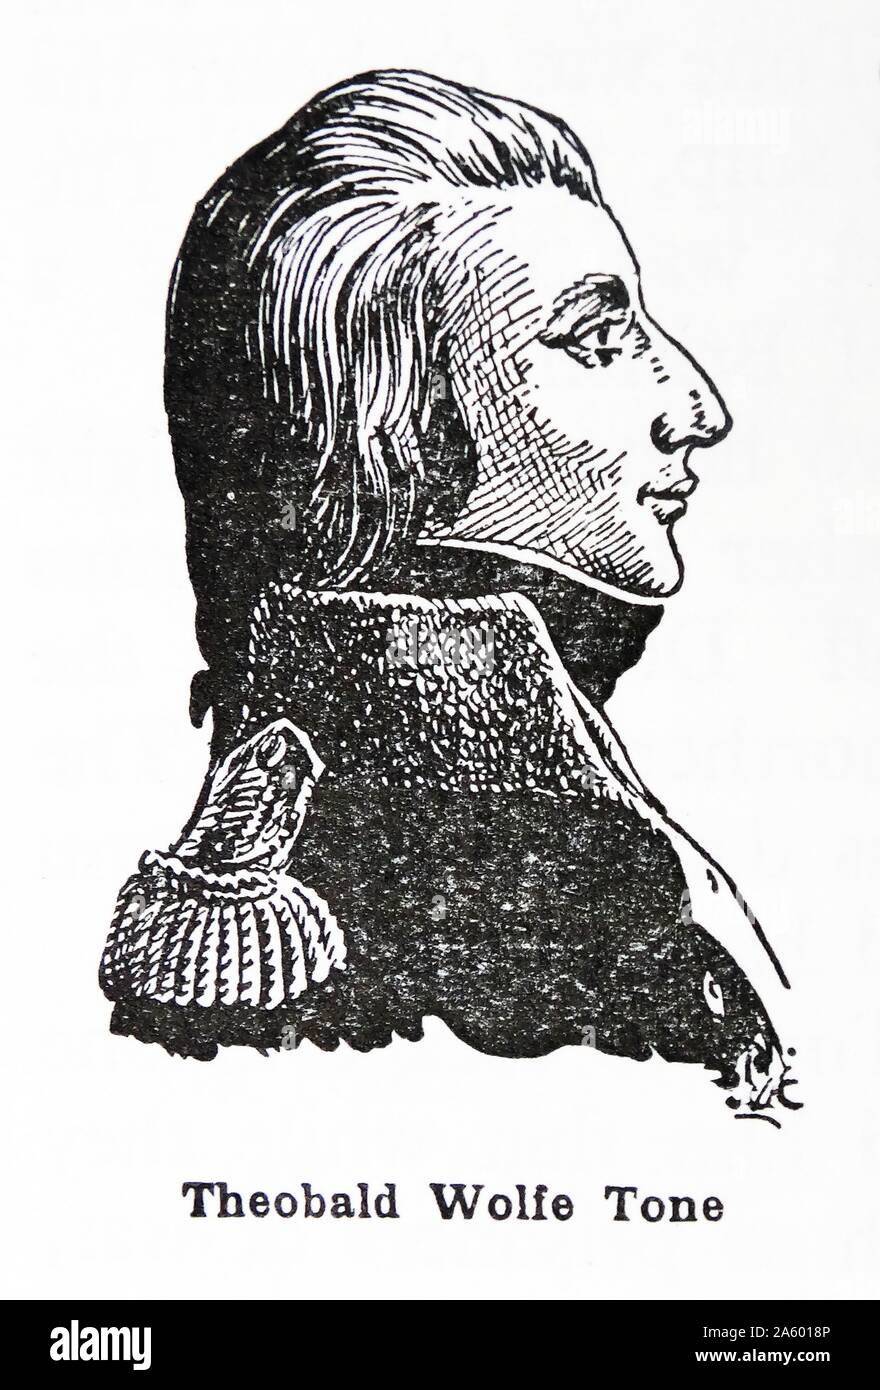 Wolfe Tone (20 June 1763 – 19 November 1798); was a leading Irish revolutionary figure and one of the founding members of the United Irishmen and is regarded as the father of Irish republicanism. Stock Photo